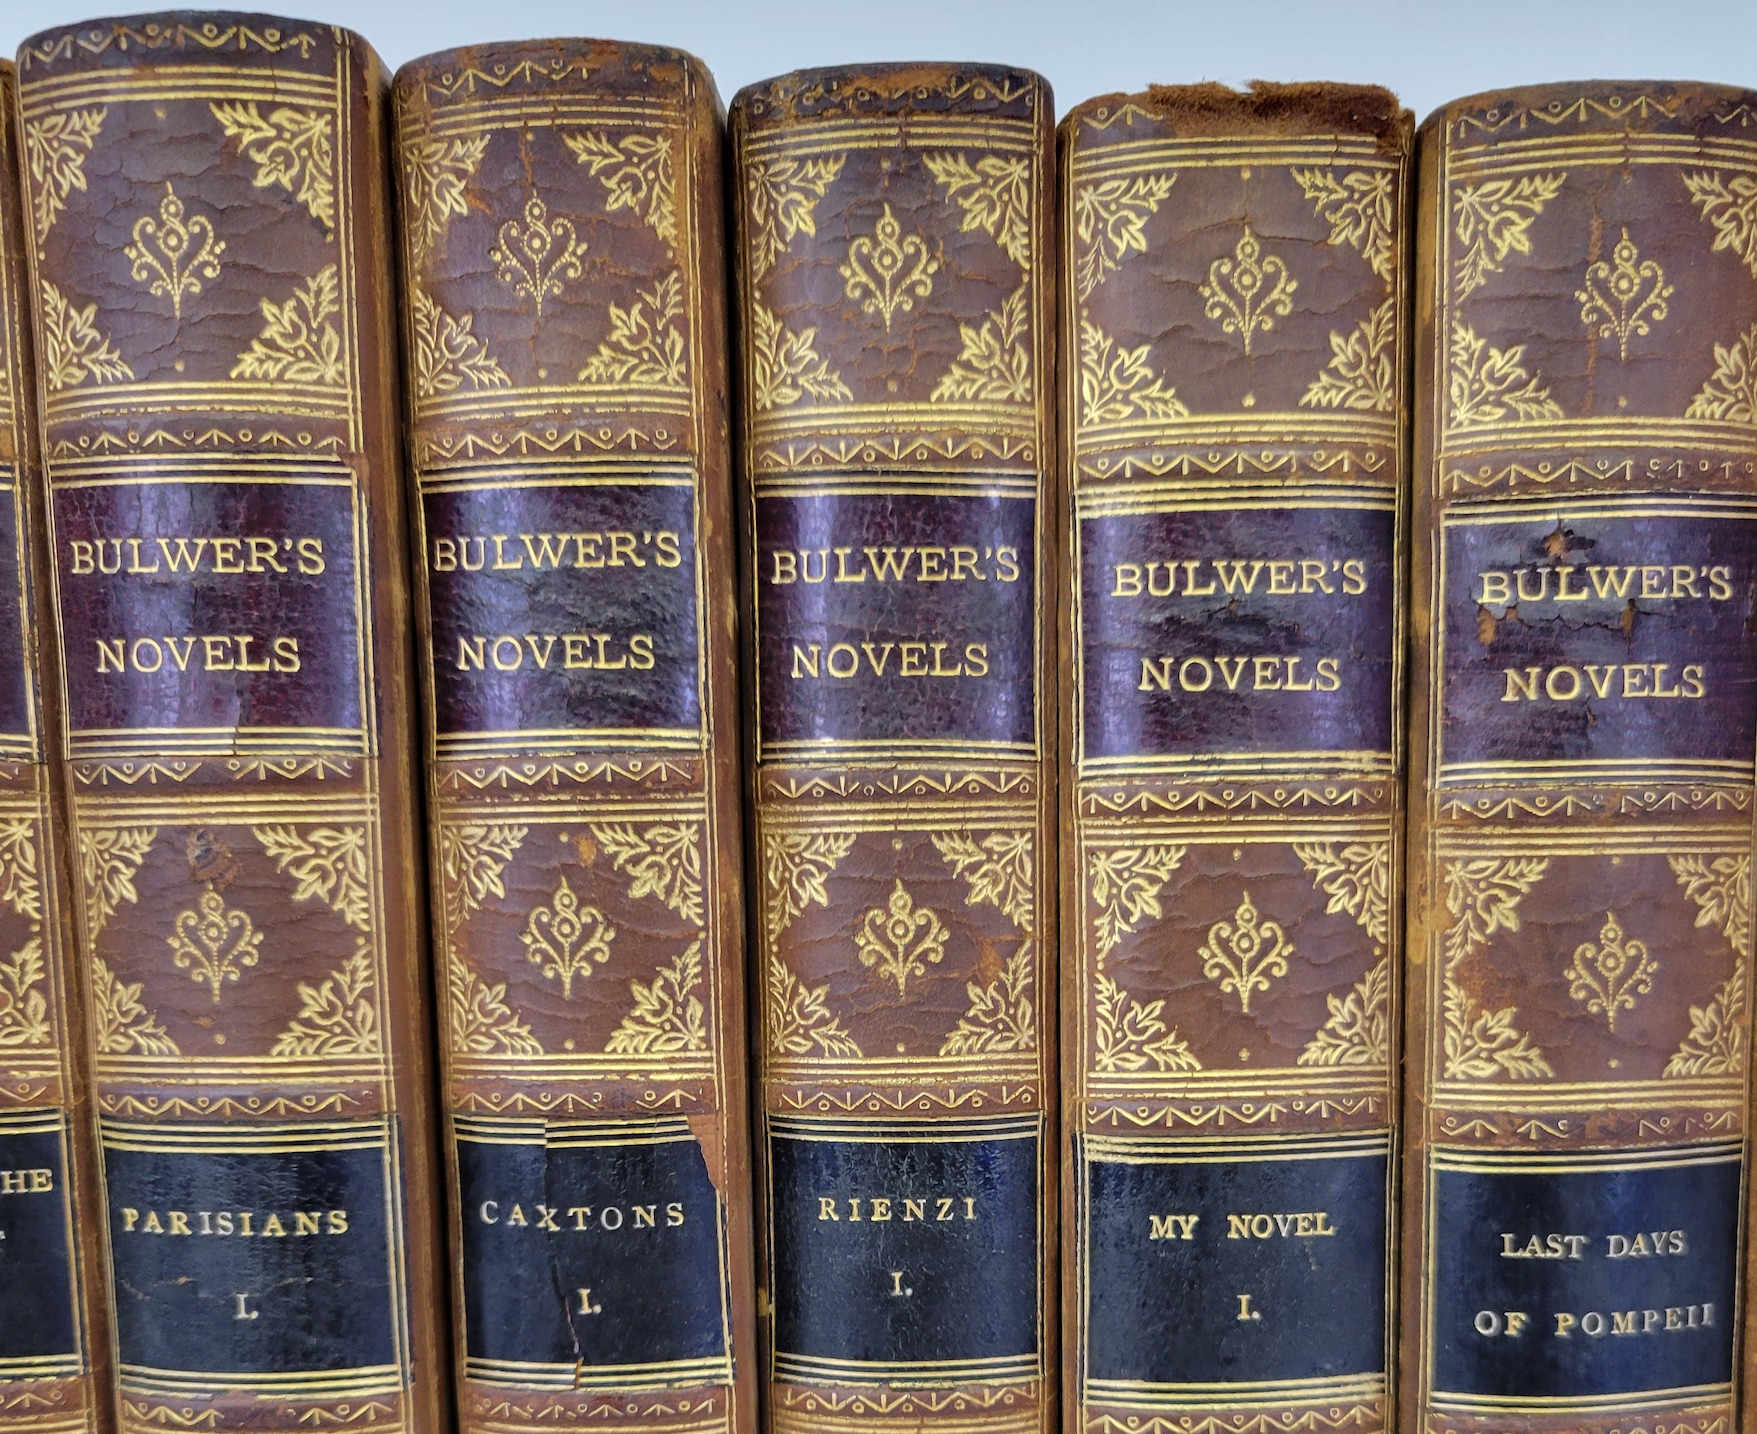 Set of 30 Leatherbound Books: The Novels of Edward Bulwer Lytton 1892 Library Edition